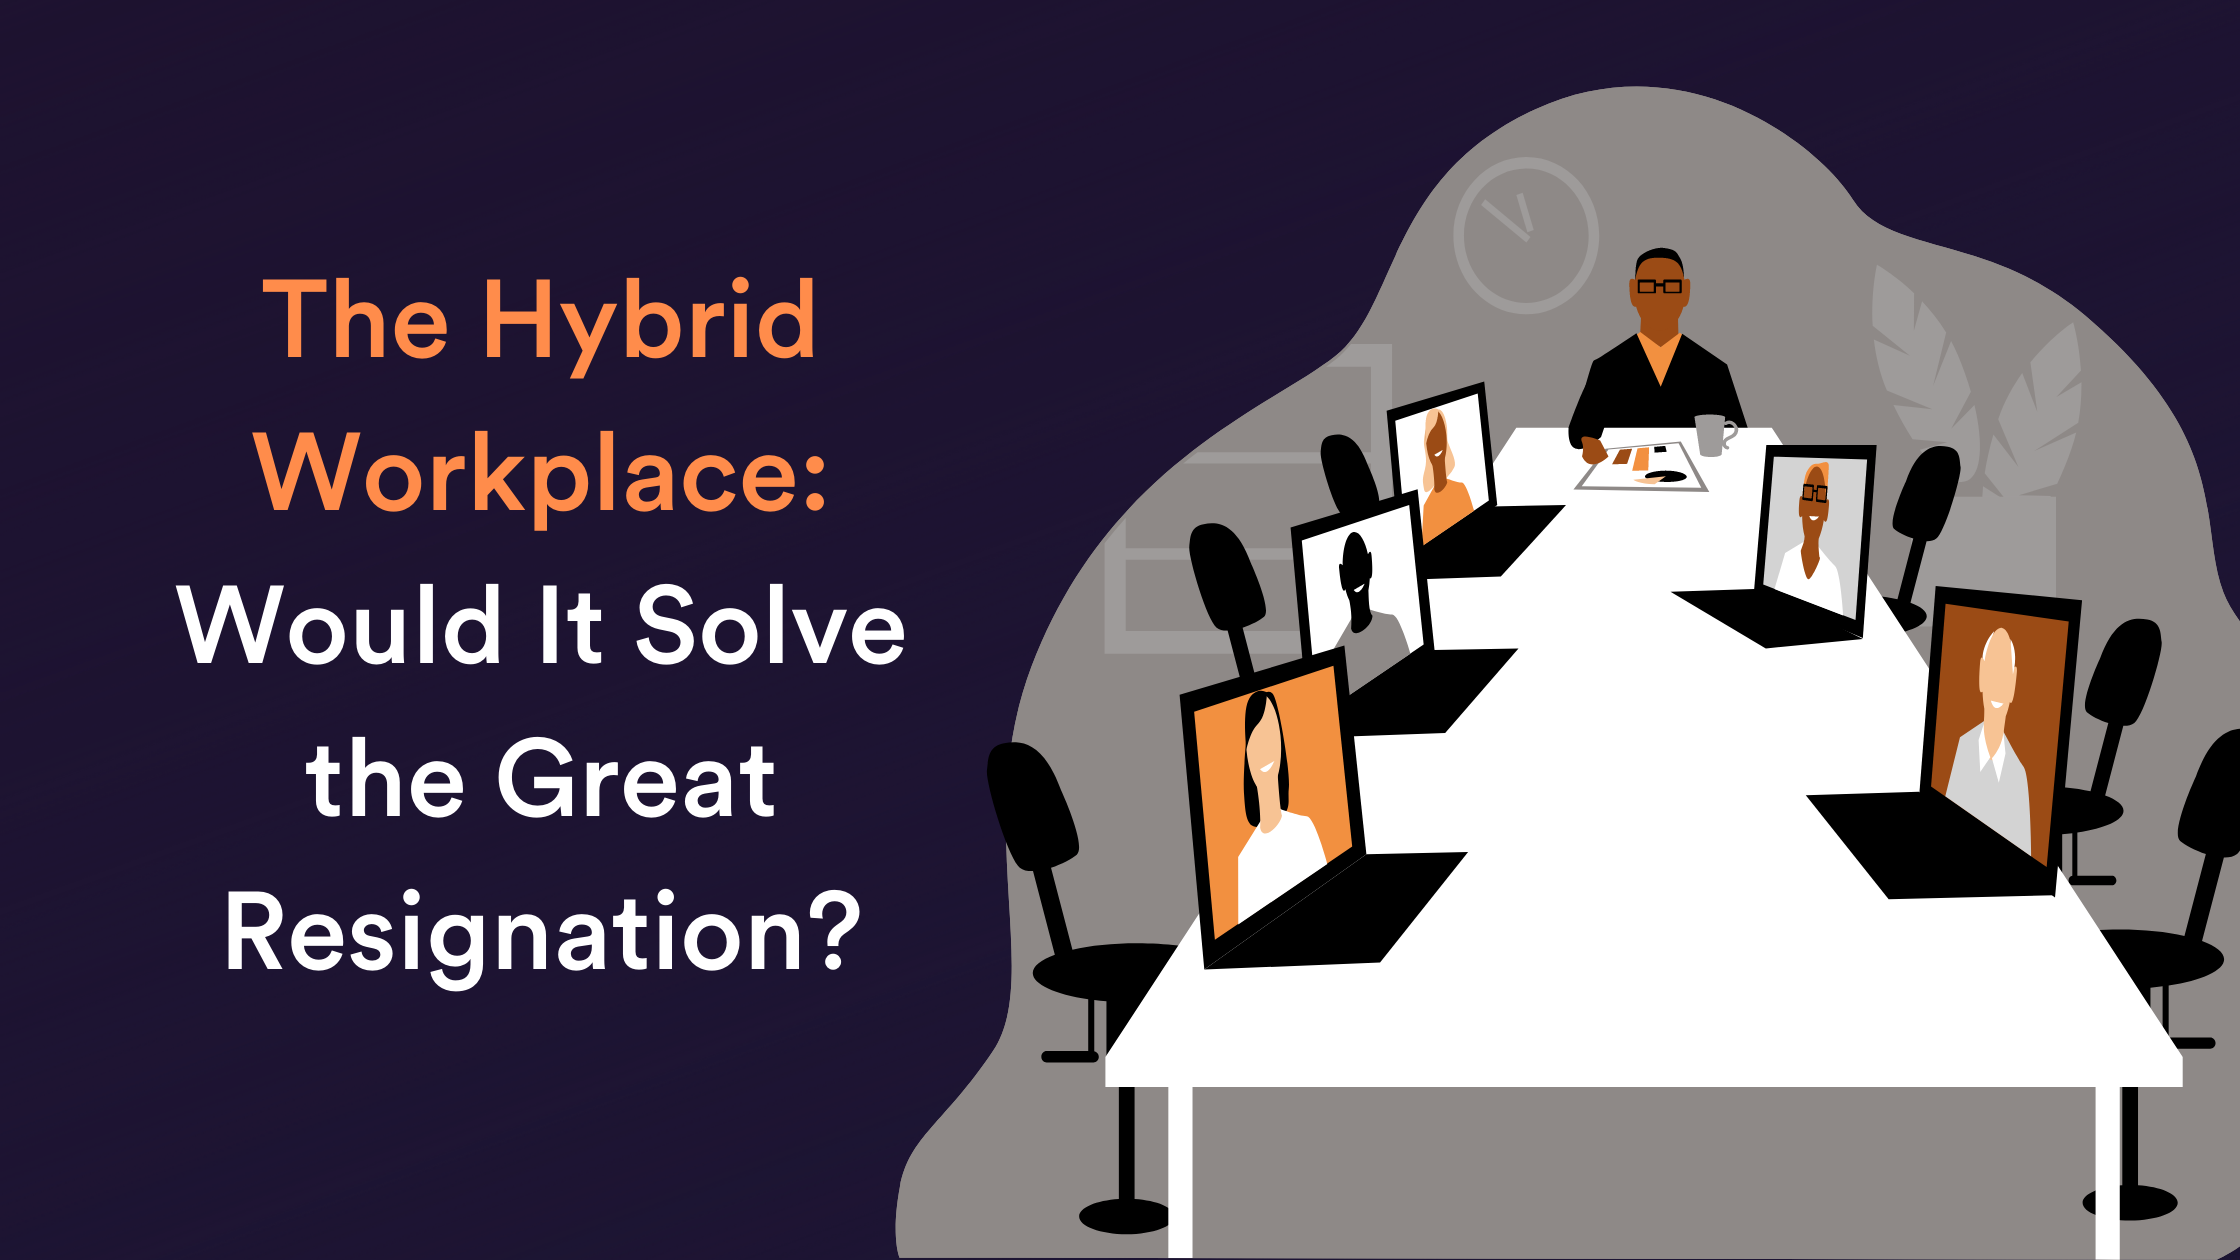 The Hybrid Workplace: Would It Solve the Great Resignation?